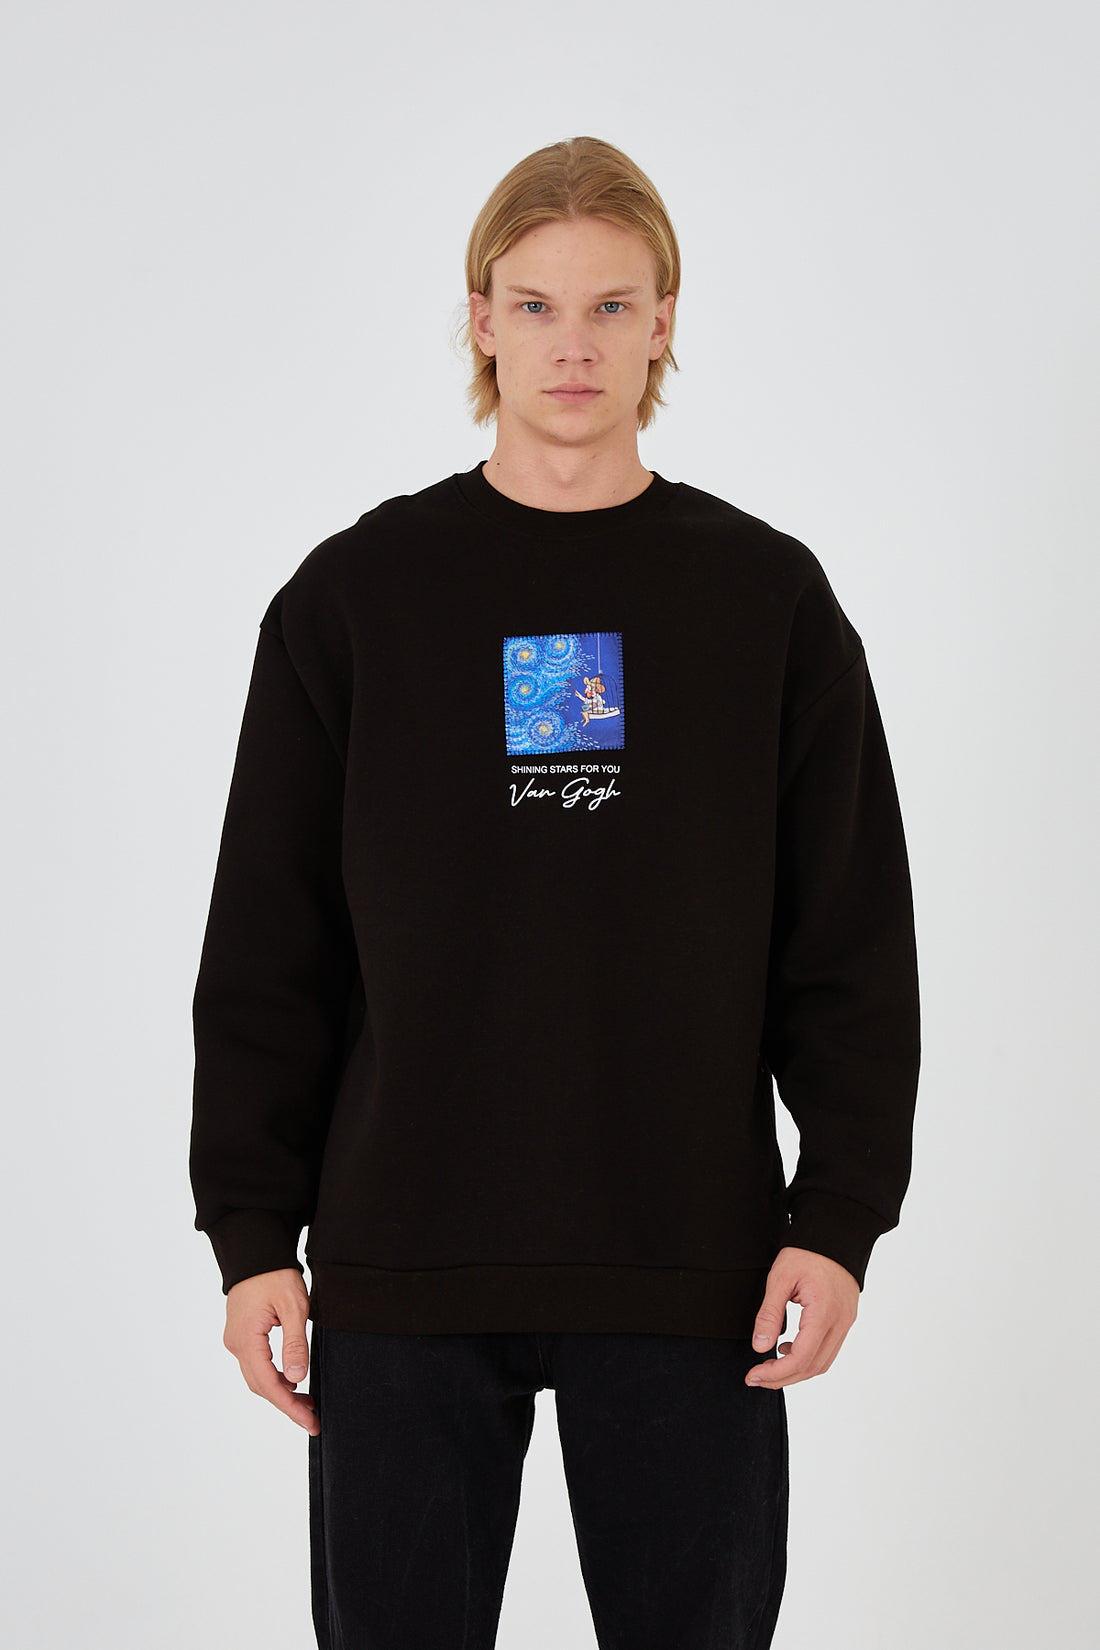 SWEATER - SHINING STARS FOR YOU - BLACK - DYS-Amsterdam